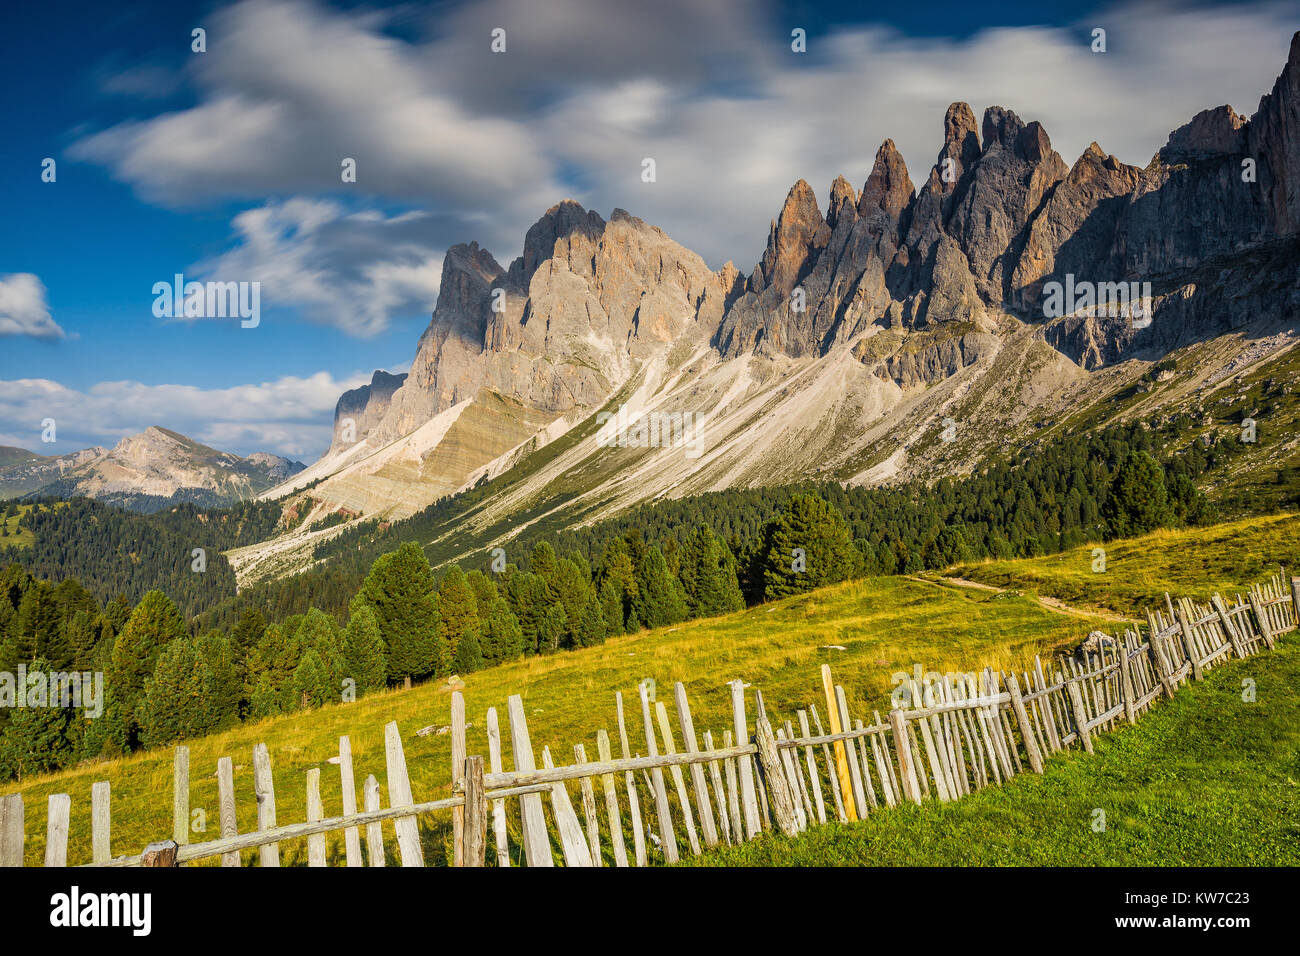 The Odle mountain group. Alpine grasslands, wooden fences in the Funes Valley. The Gardena Dolomites, South Tyrol, Italian Alps. Europe. Stock Photo